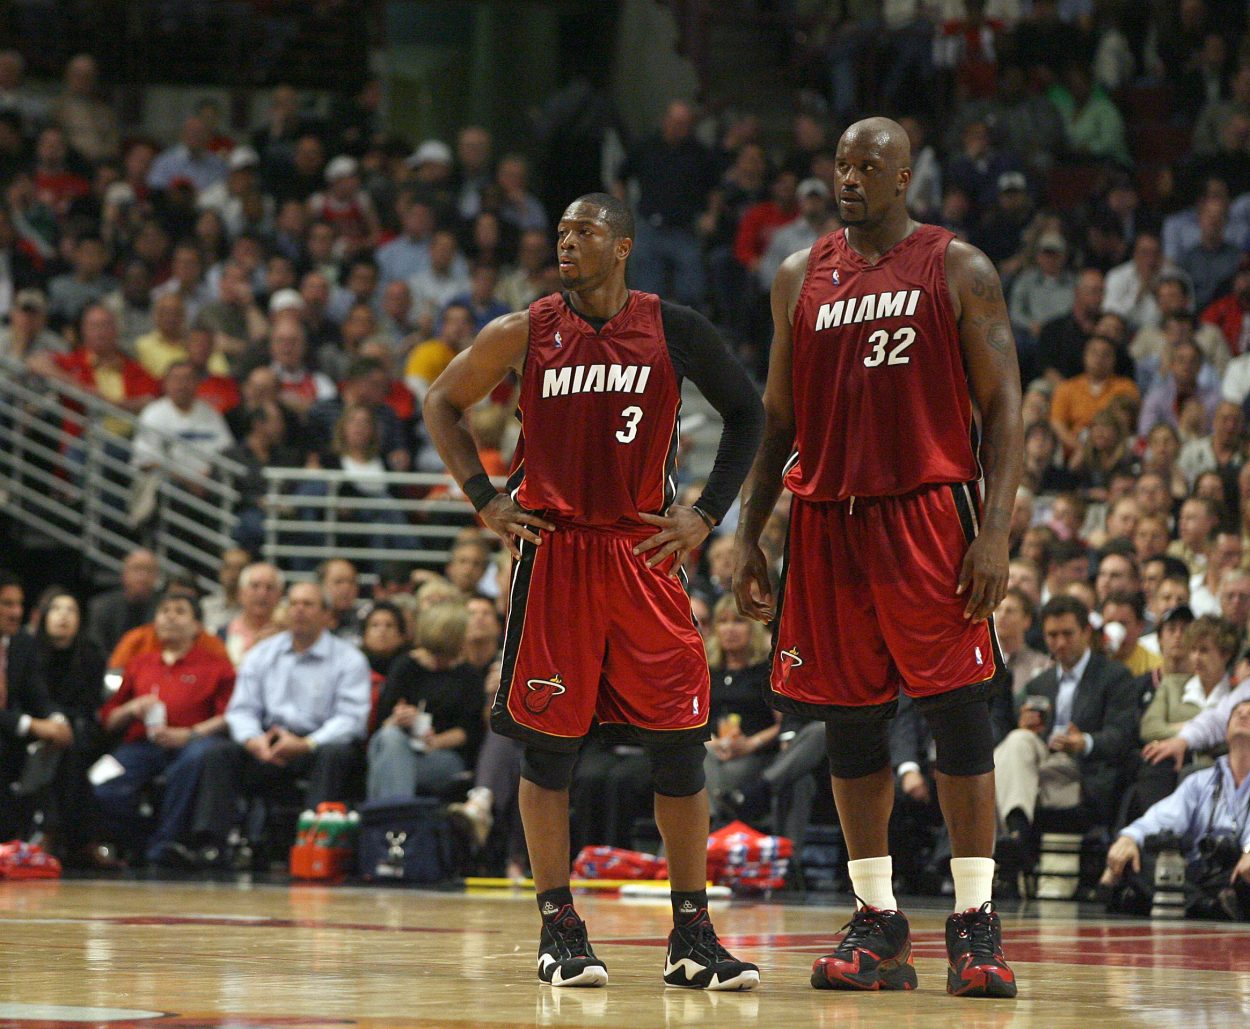 Former Miami Heat teammates Dwyane Wade and Shaquille O'Neal look on during an NBA game in 2007